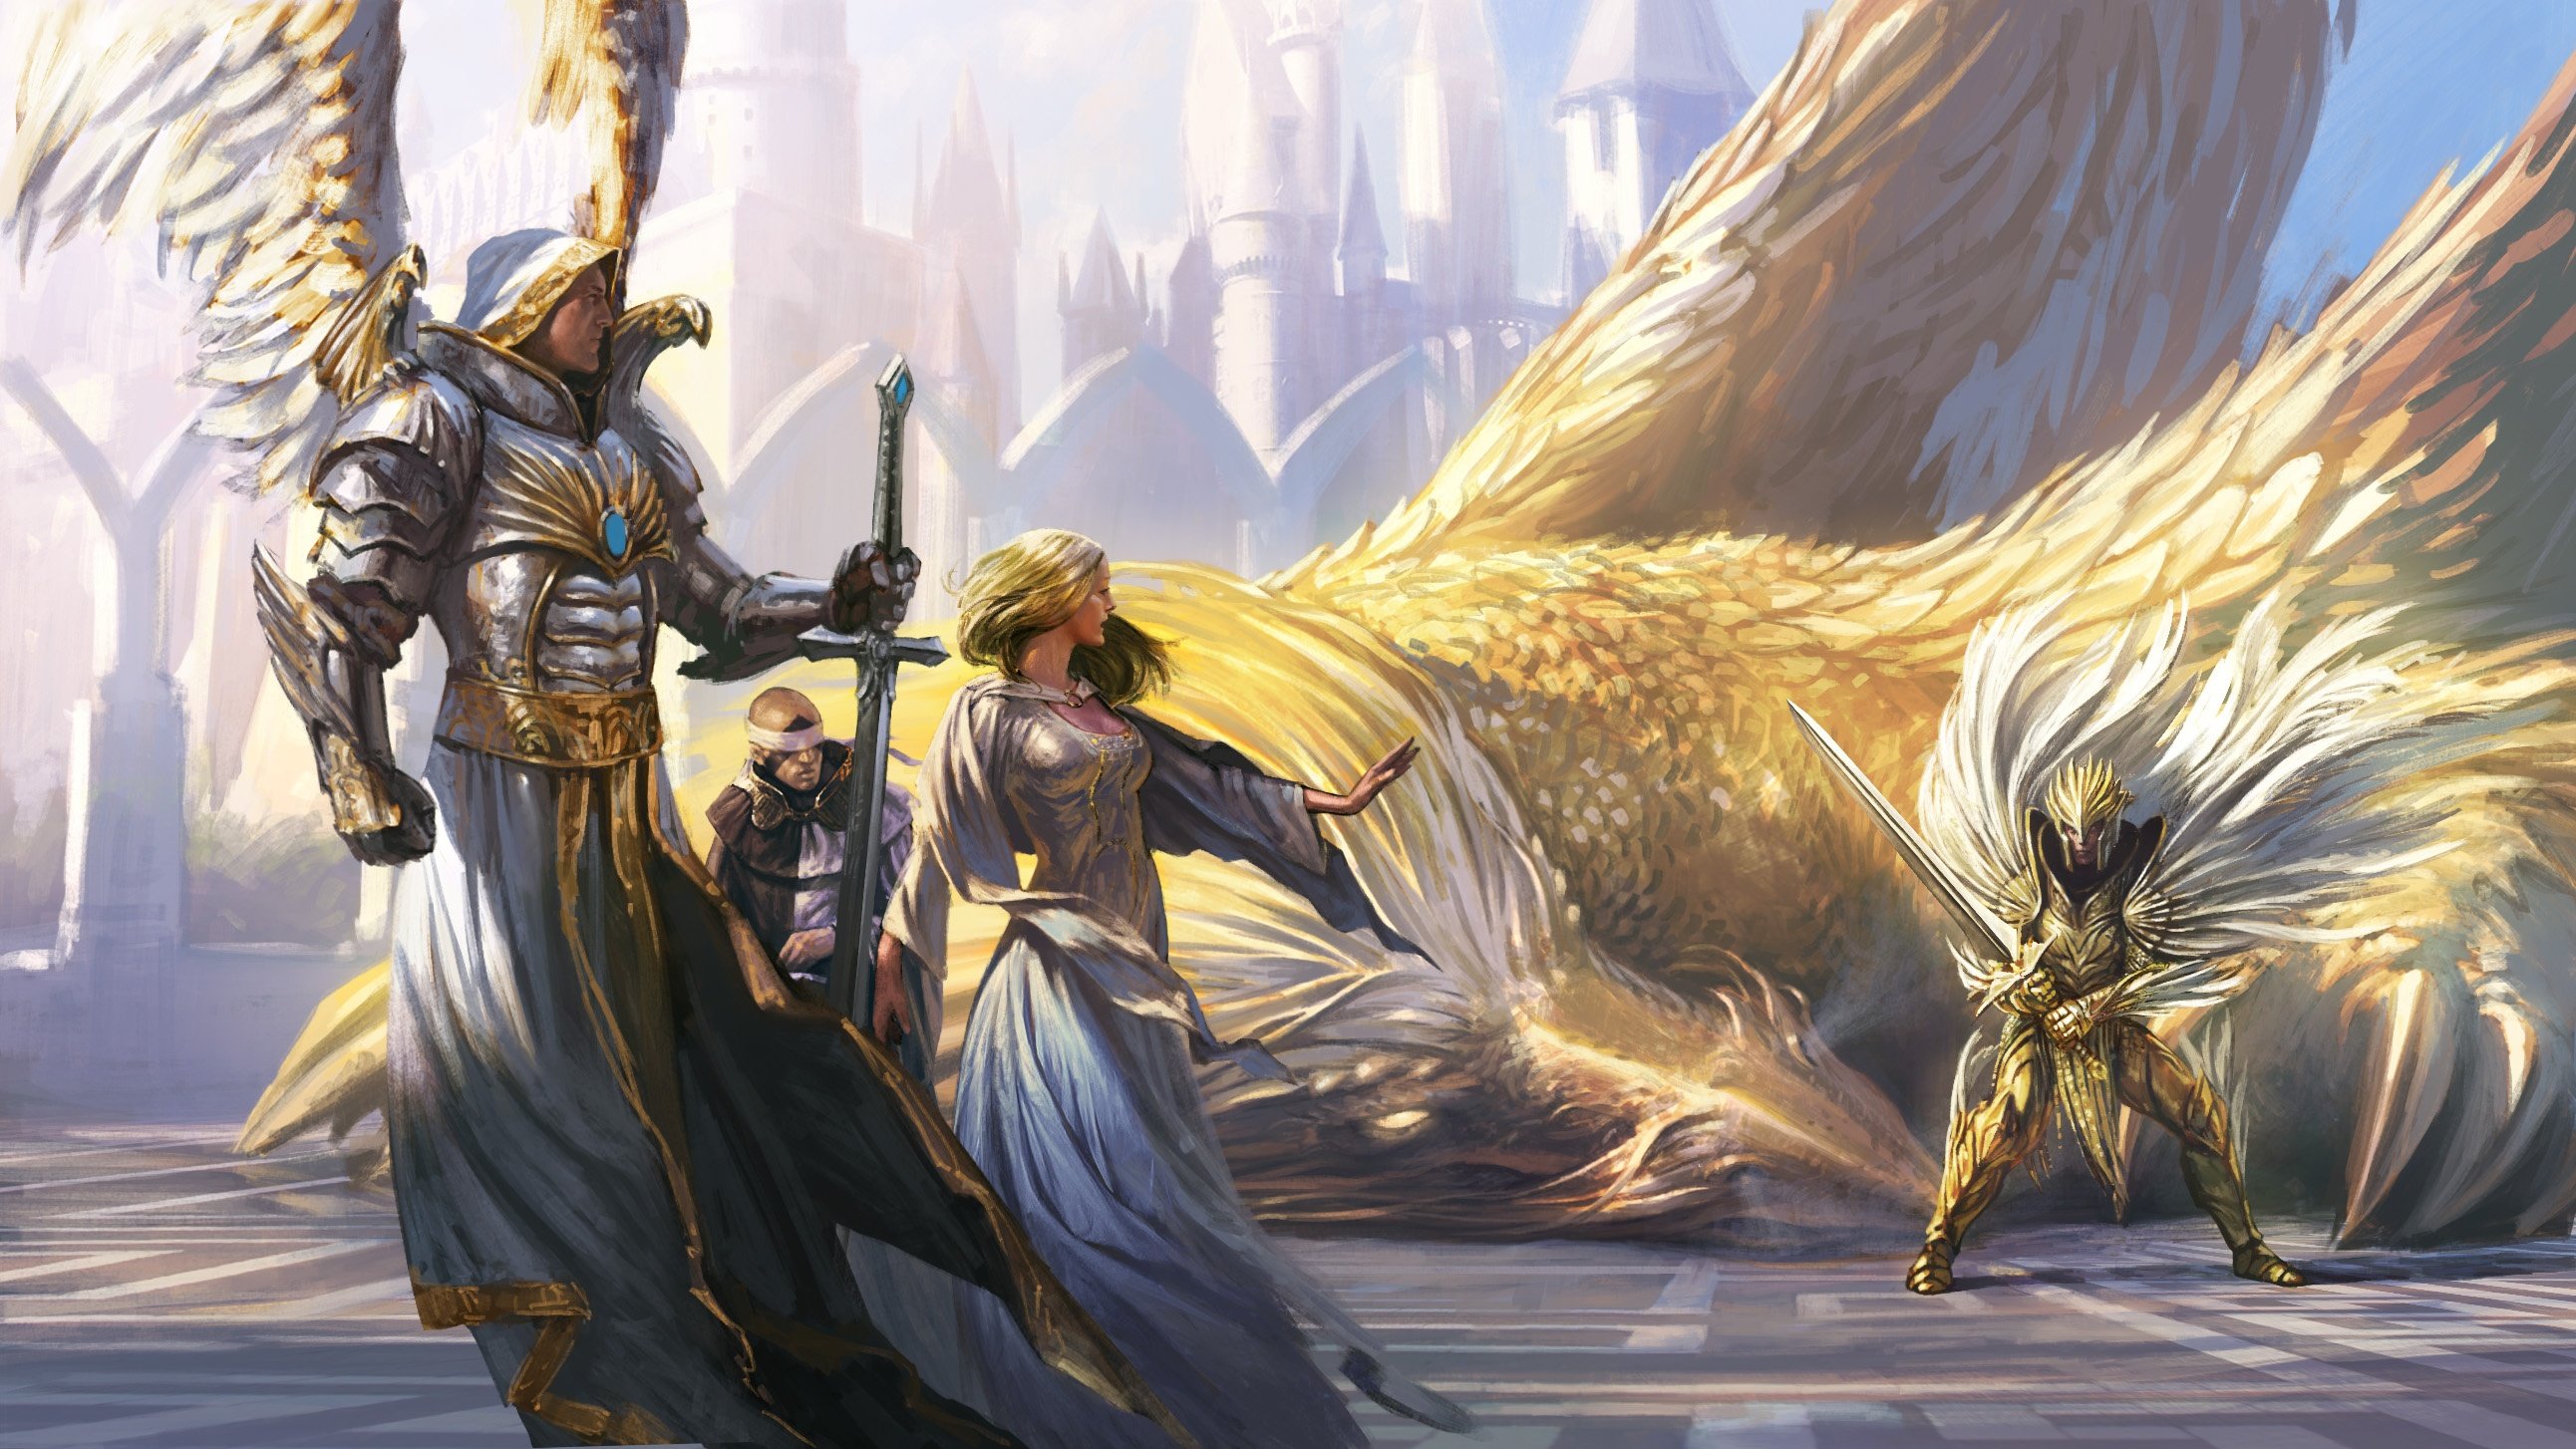 heroes, Might, Magic, Strategy, Fantasy, Fighting, Adventure, Action, Online, 1hmm, Warrior, Angel, Battle, Griffin, Eagle Wallpaper